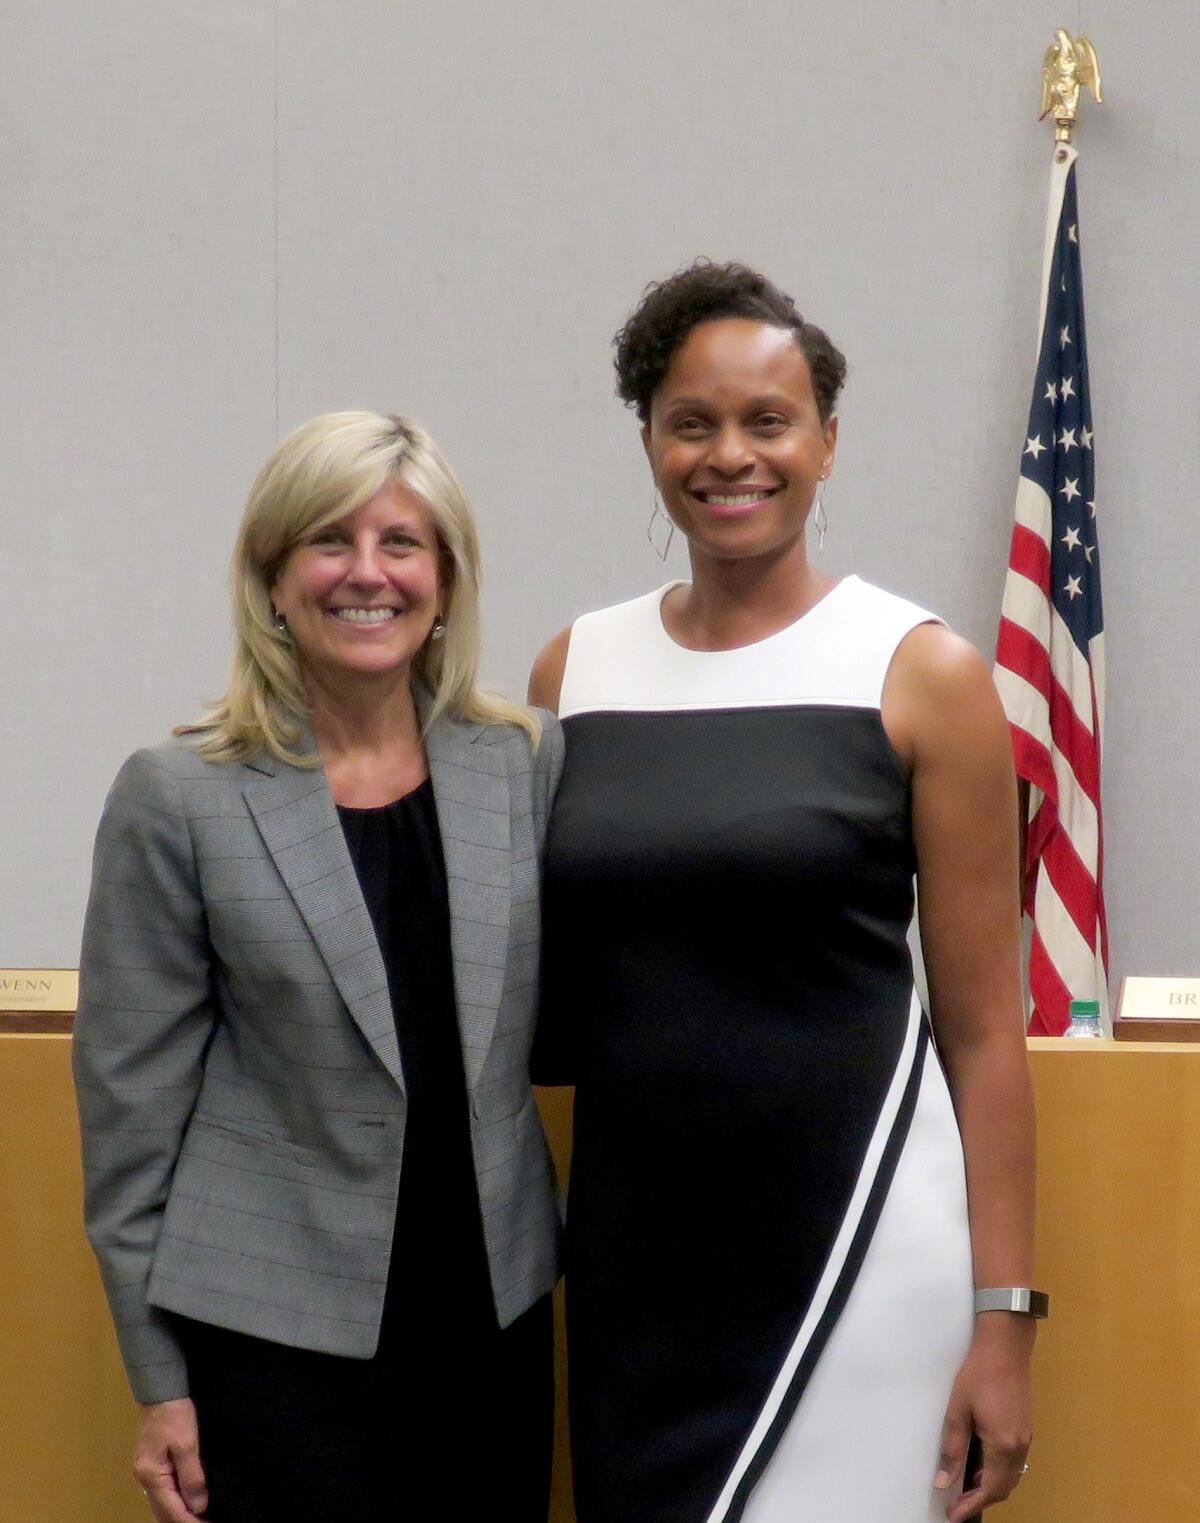 LCUSD Supt. Wendy Sinnette, left, with Christina Hale-Elliott, who entered into a $95,000 one-year consultant agreement to work in support of diversity, equity and inclusion throughout the district.